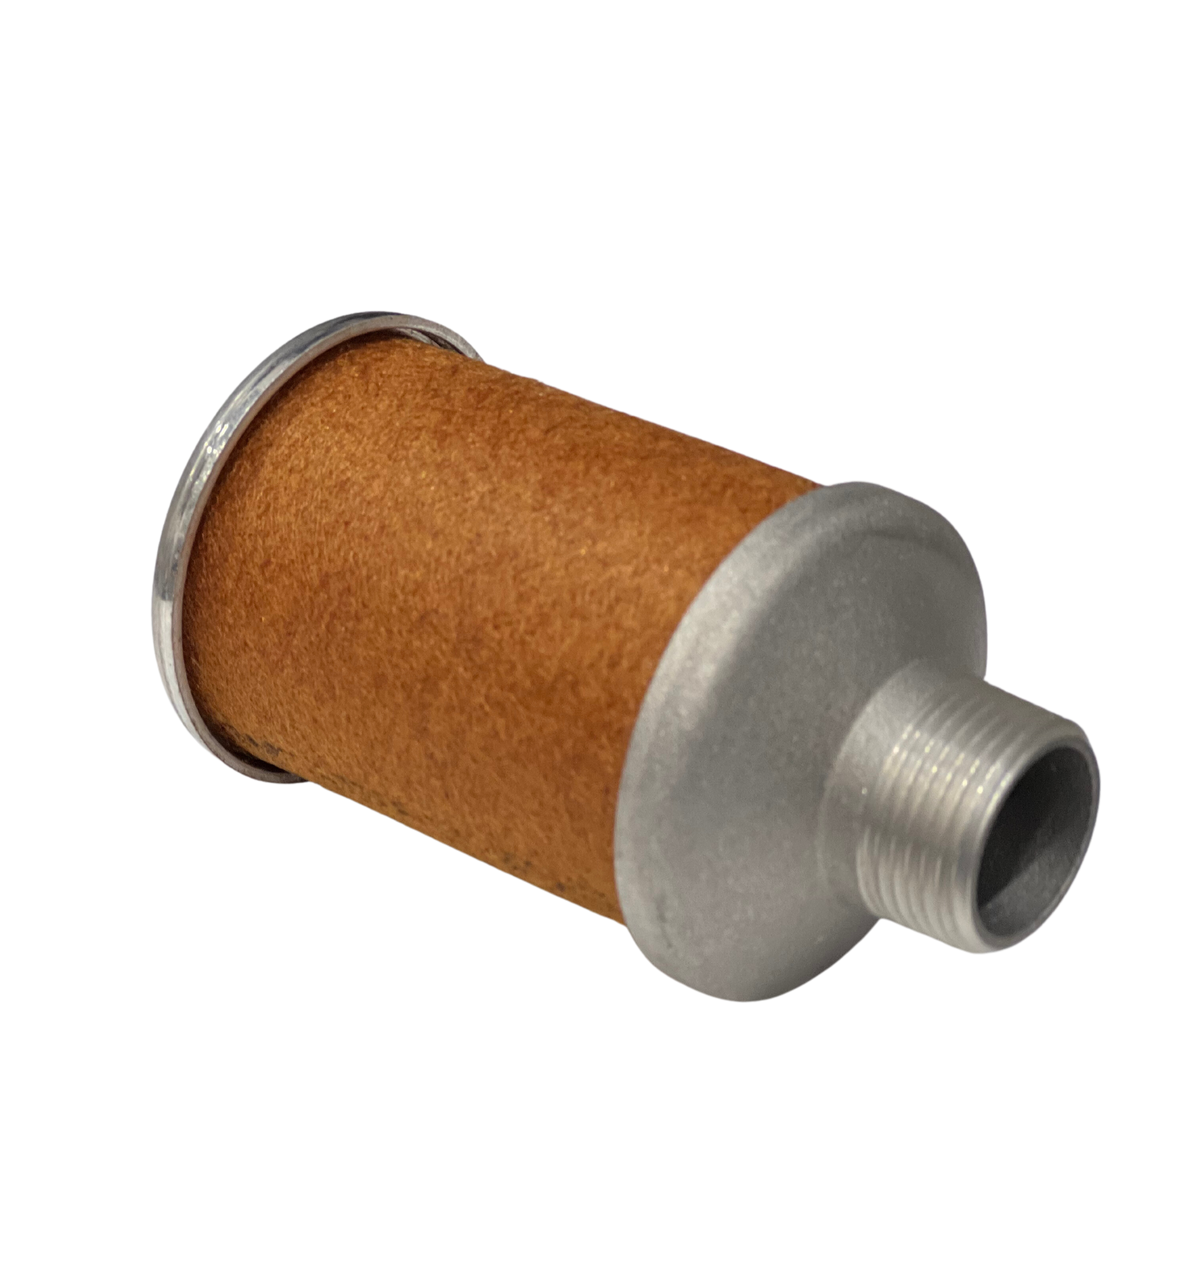 side view of a cylinder shaped intake filter with a brown filter in the center and a threaded port on the right